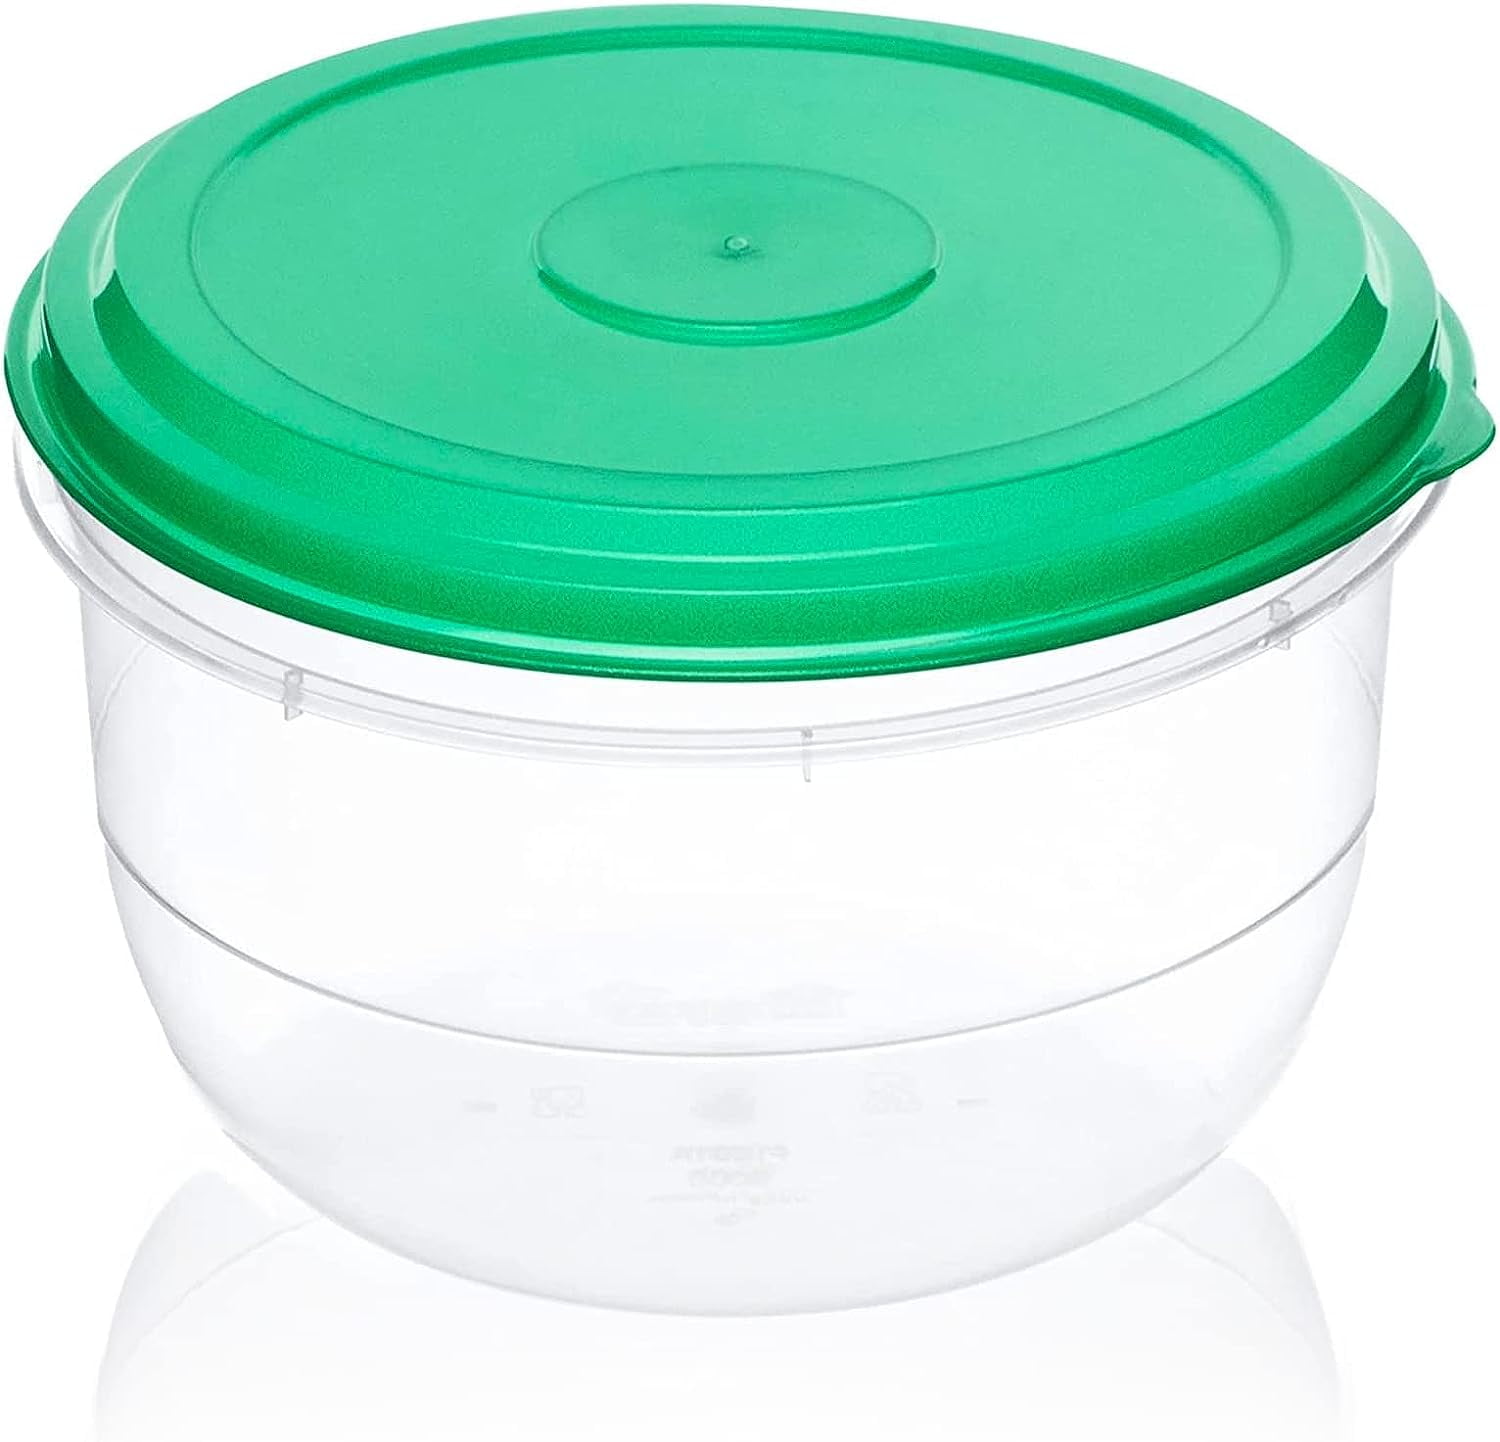  DecorRack Extra Large Food Storage Container with Lid